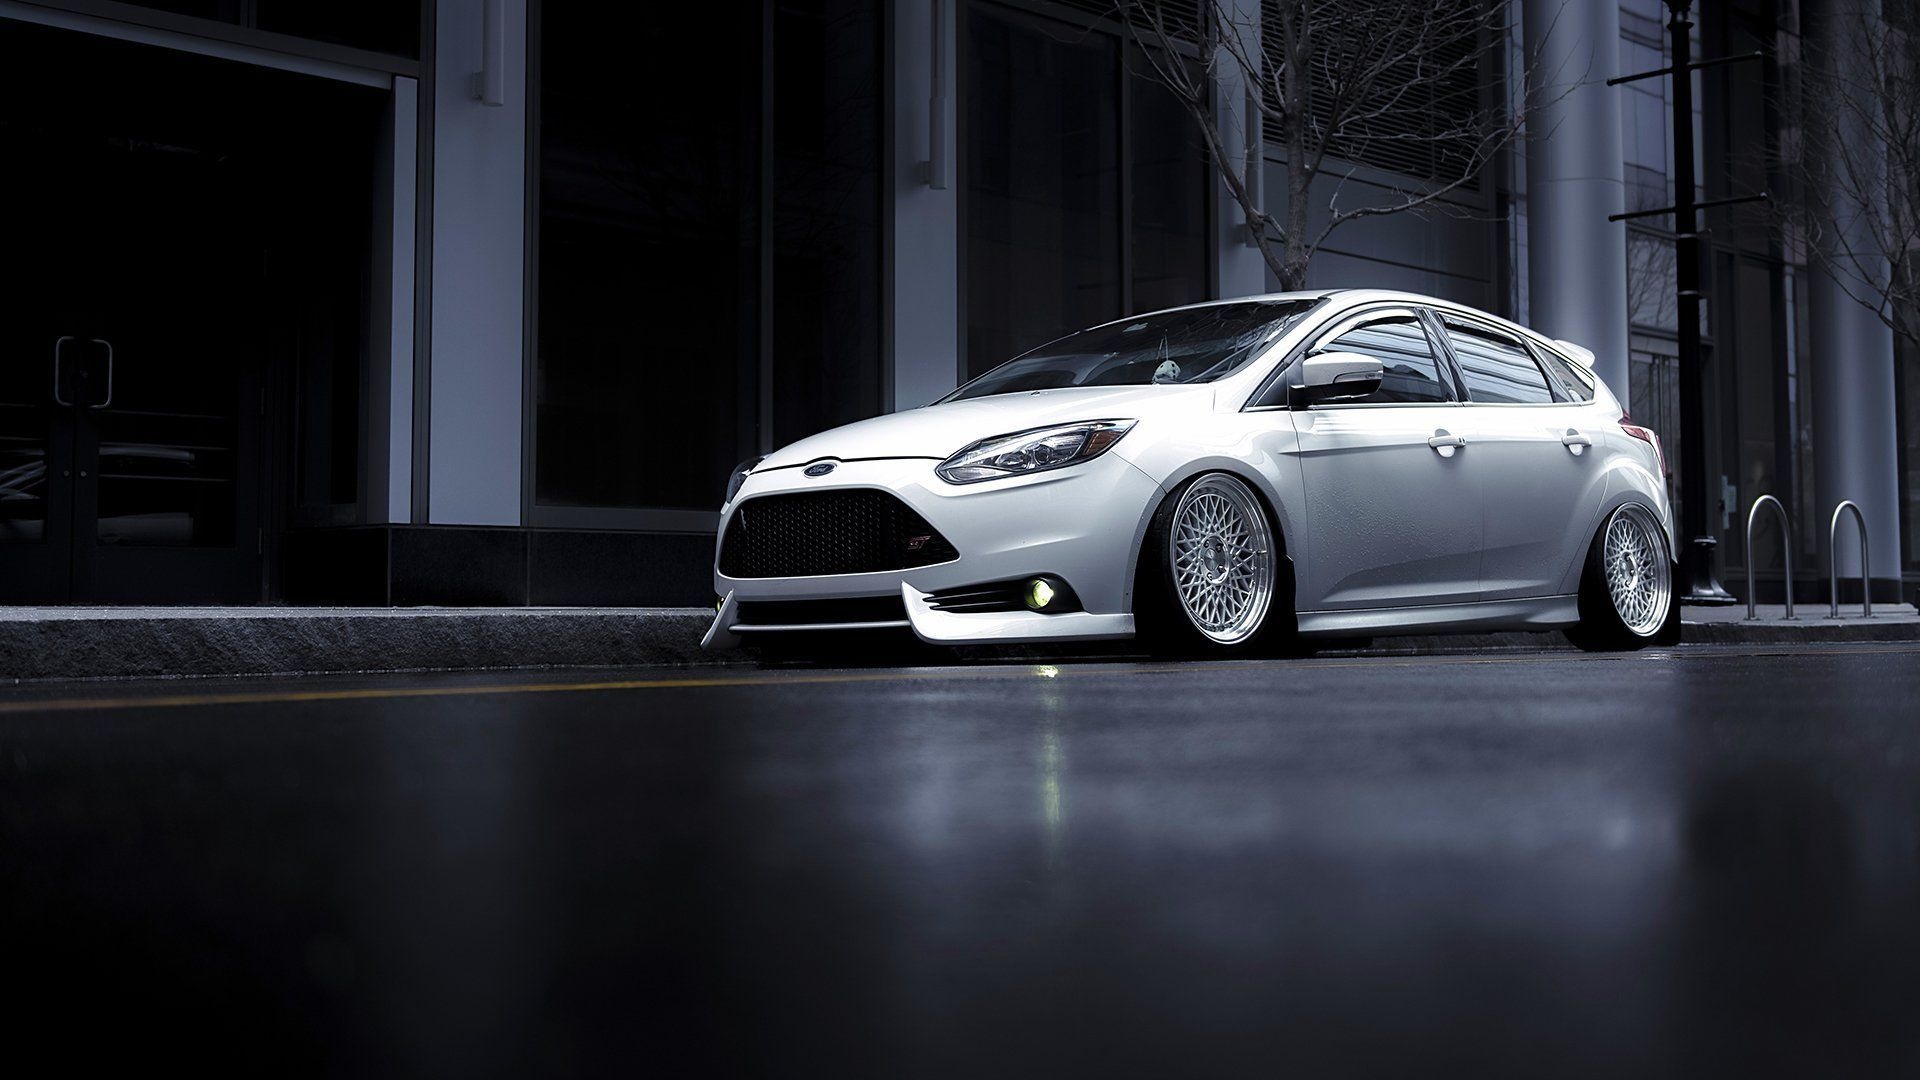 Ford Focus: Was first introduced in 1998 as a replacement for the Escort. 1920x1080 Full HD Wallpaper.